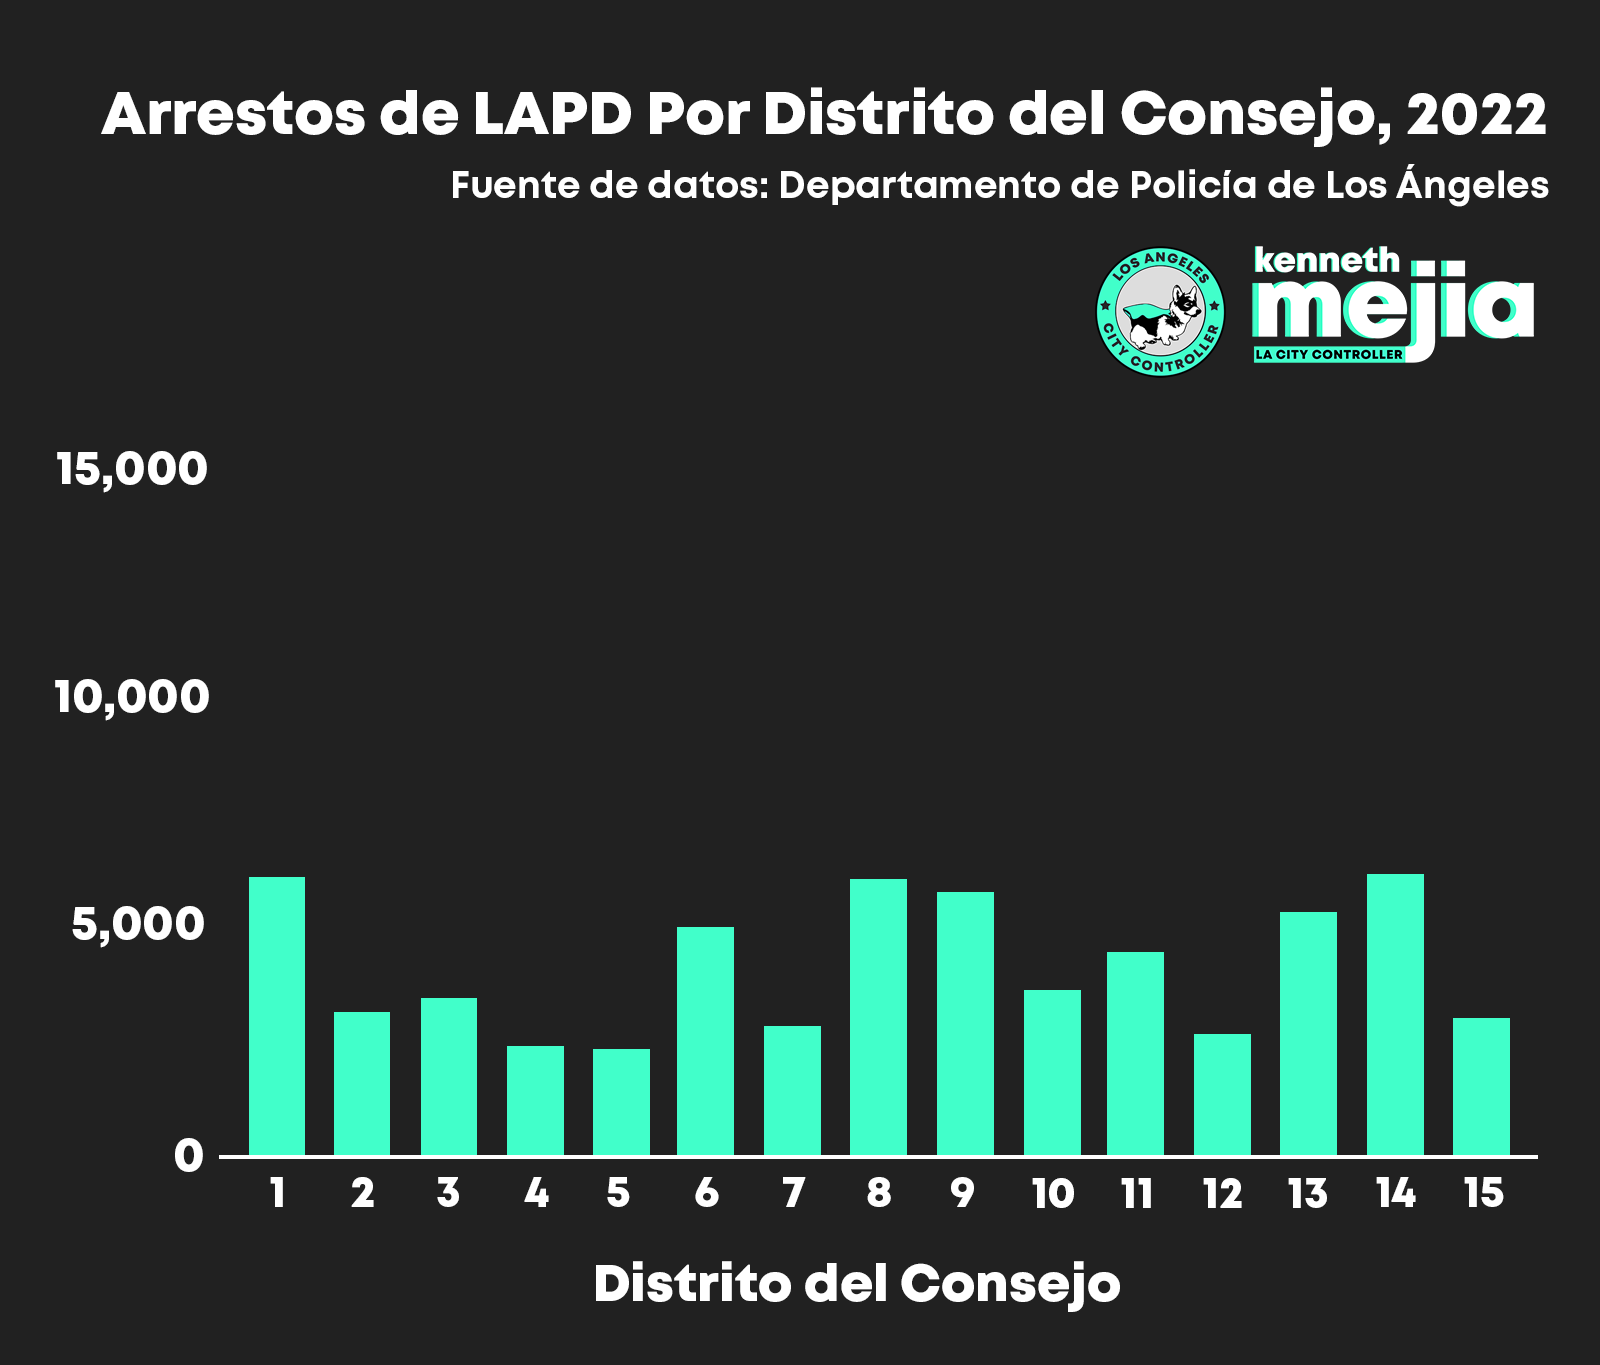 A bar chart of LAPD Arrests by Council District, 2022. There are still fewer arrests overall compared to 2019. There are 15 Council Districts. Council Districts 14, 8, and 1 have the highest number of arrests, at around 5,000 to 6,000 arrests, and are also fairly close in number of arrests to districts 6, 9, 11, and 13 which are also close to 5,000 arrests. The rest of the Council Districts havemuch fewer than 5,000 arrests. CDs 4 and 5 have the fewest number of arrests, at under 2,500 arrests each. Source of data is LAPD. 